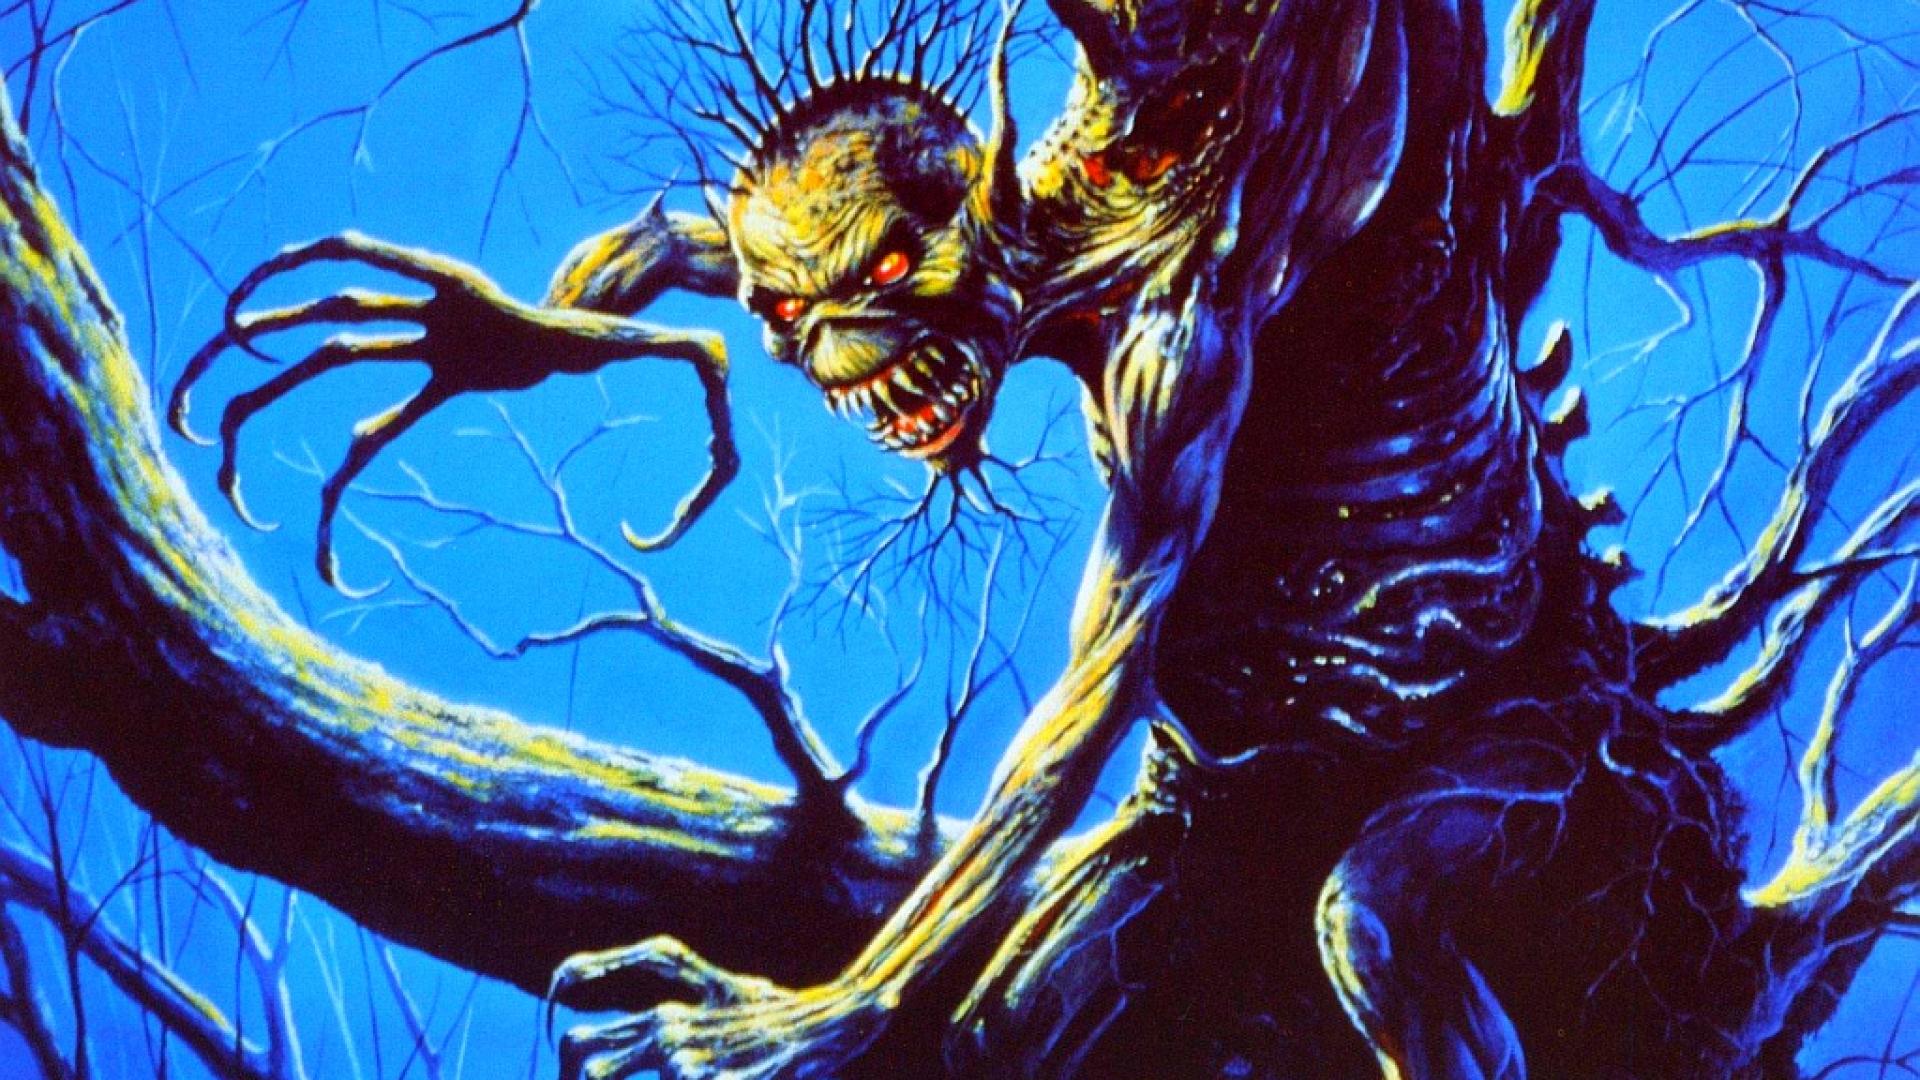 Iron Maiden HD Wallpapers, Iron Maiden Images, New Wallpapers